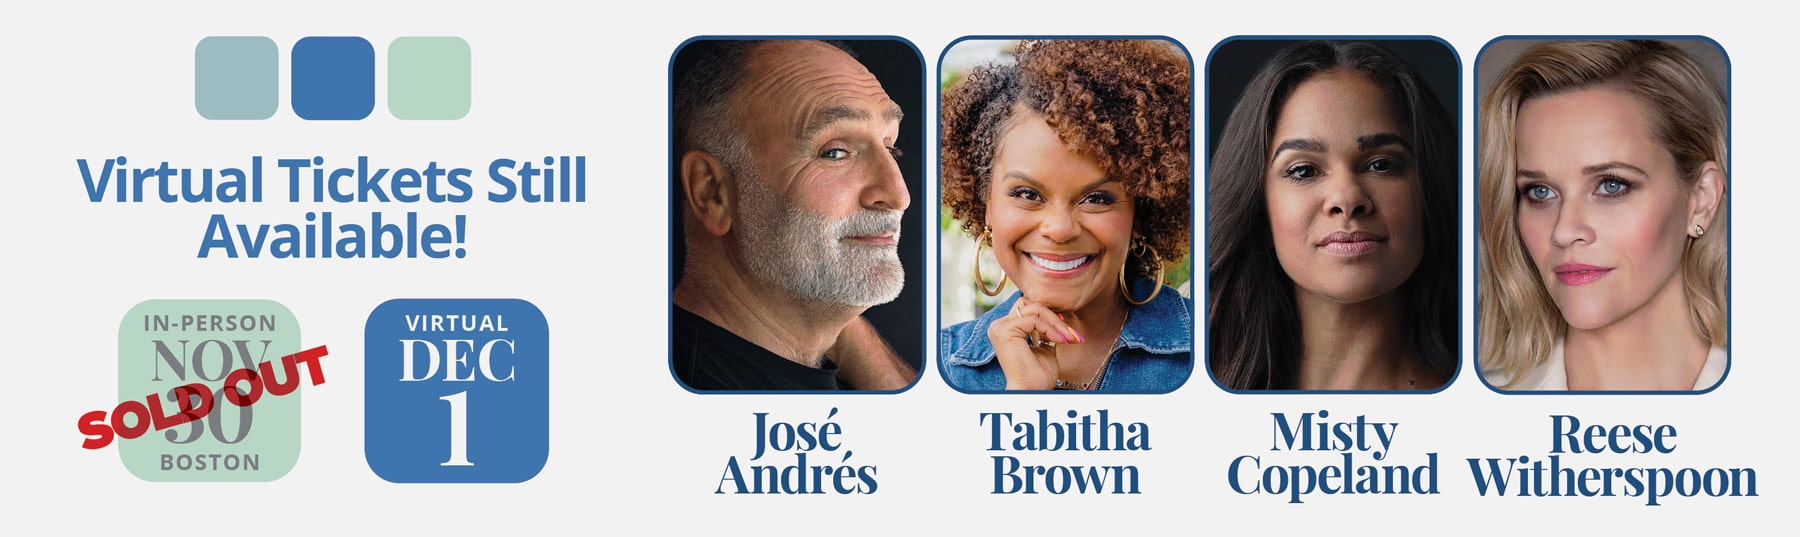 Virtual Conference tickets are still available featuring José Andrés, Tabitha Brown, Misty Copeland and Reese Witherspoon